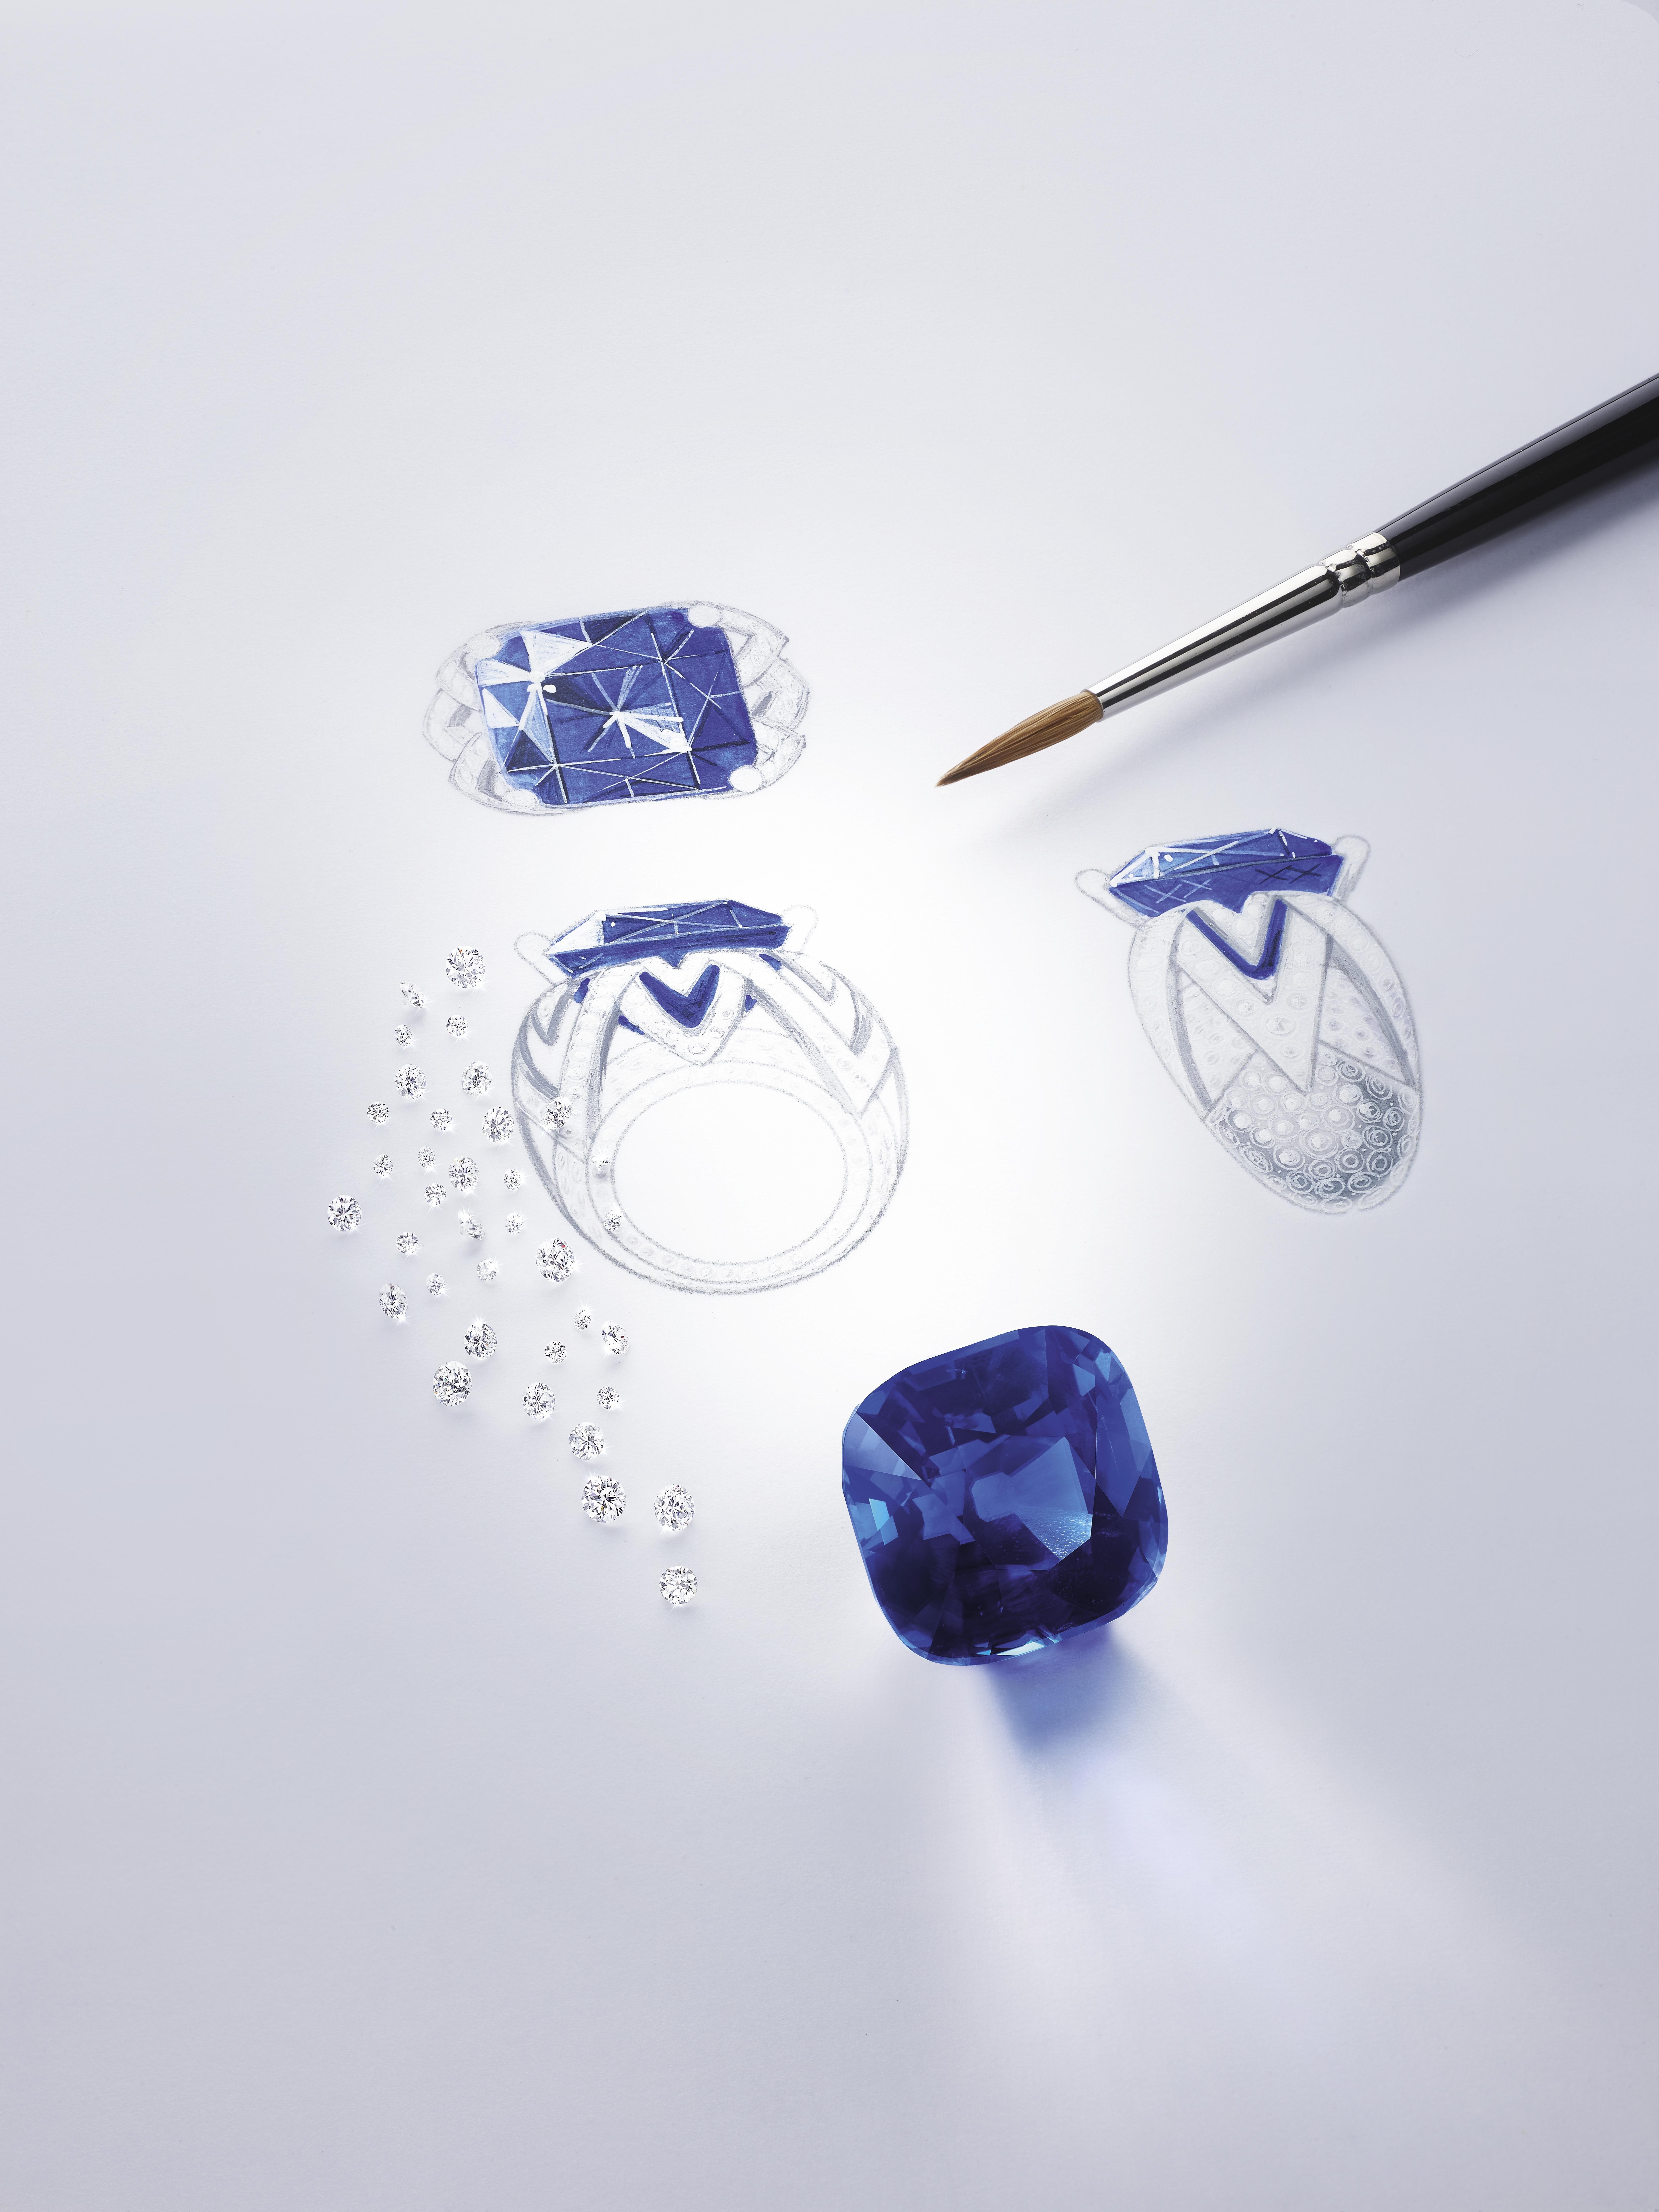 The making of Piaget Blue Ring 18ct white gold ring set with a 53.45ct cushion-shaped blue sapphire from Burma and brilliant-cut diamonds. Photo: Eric Sauvage